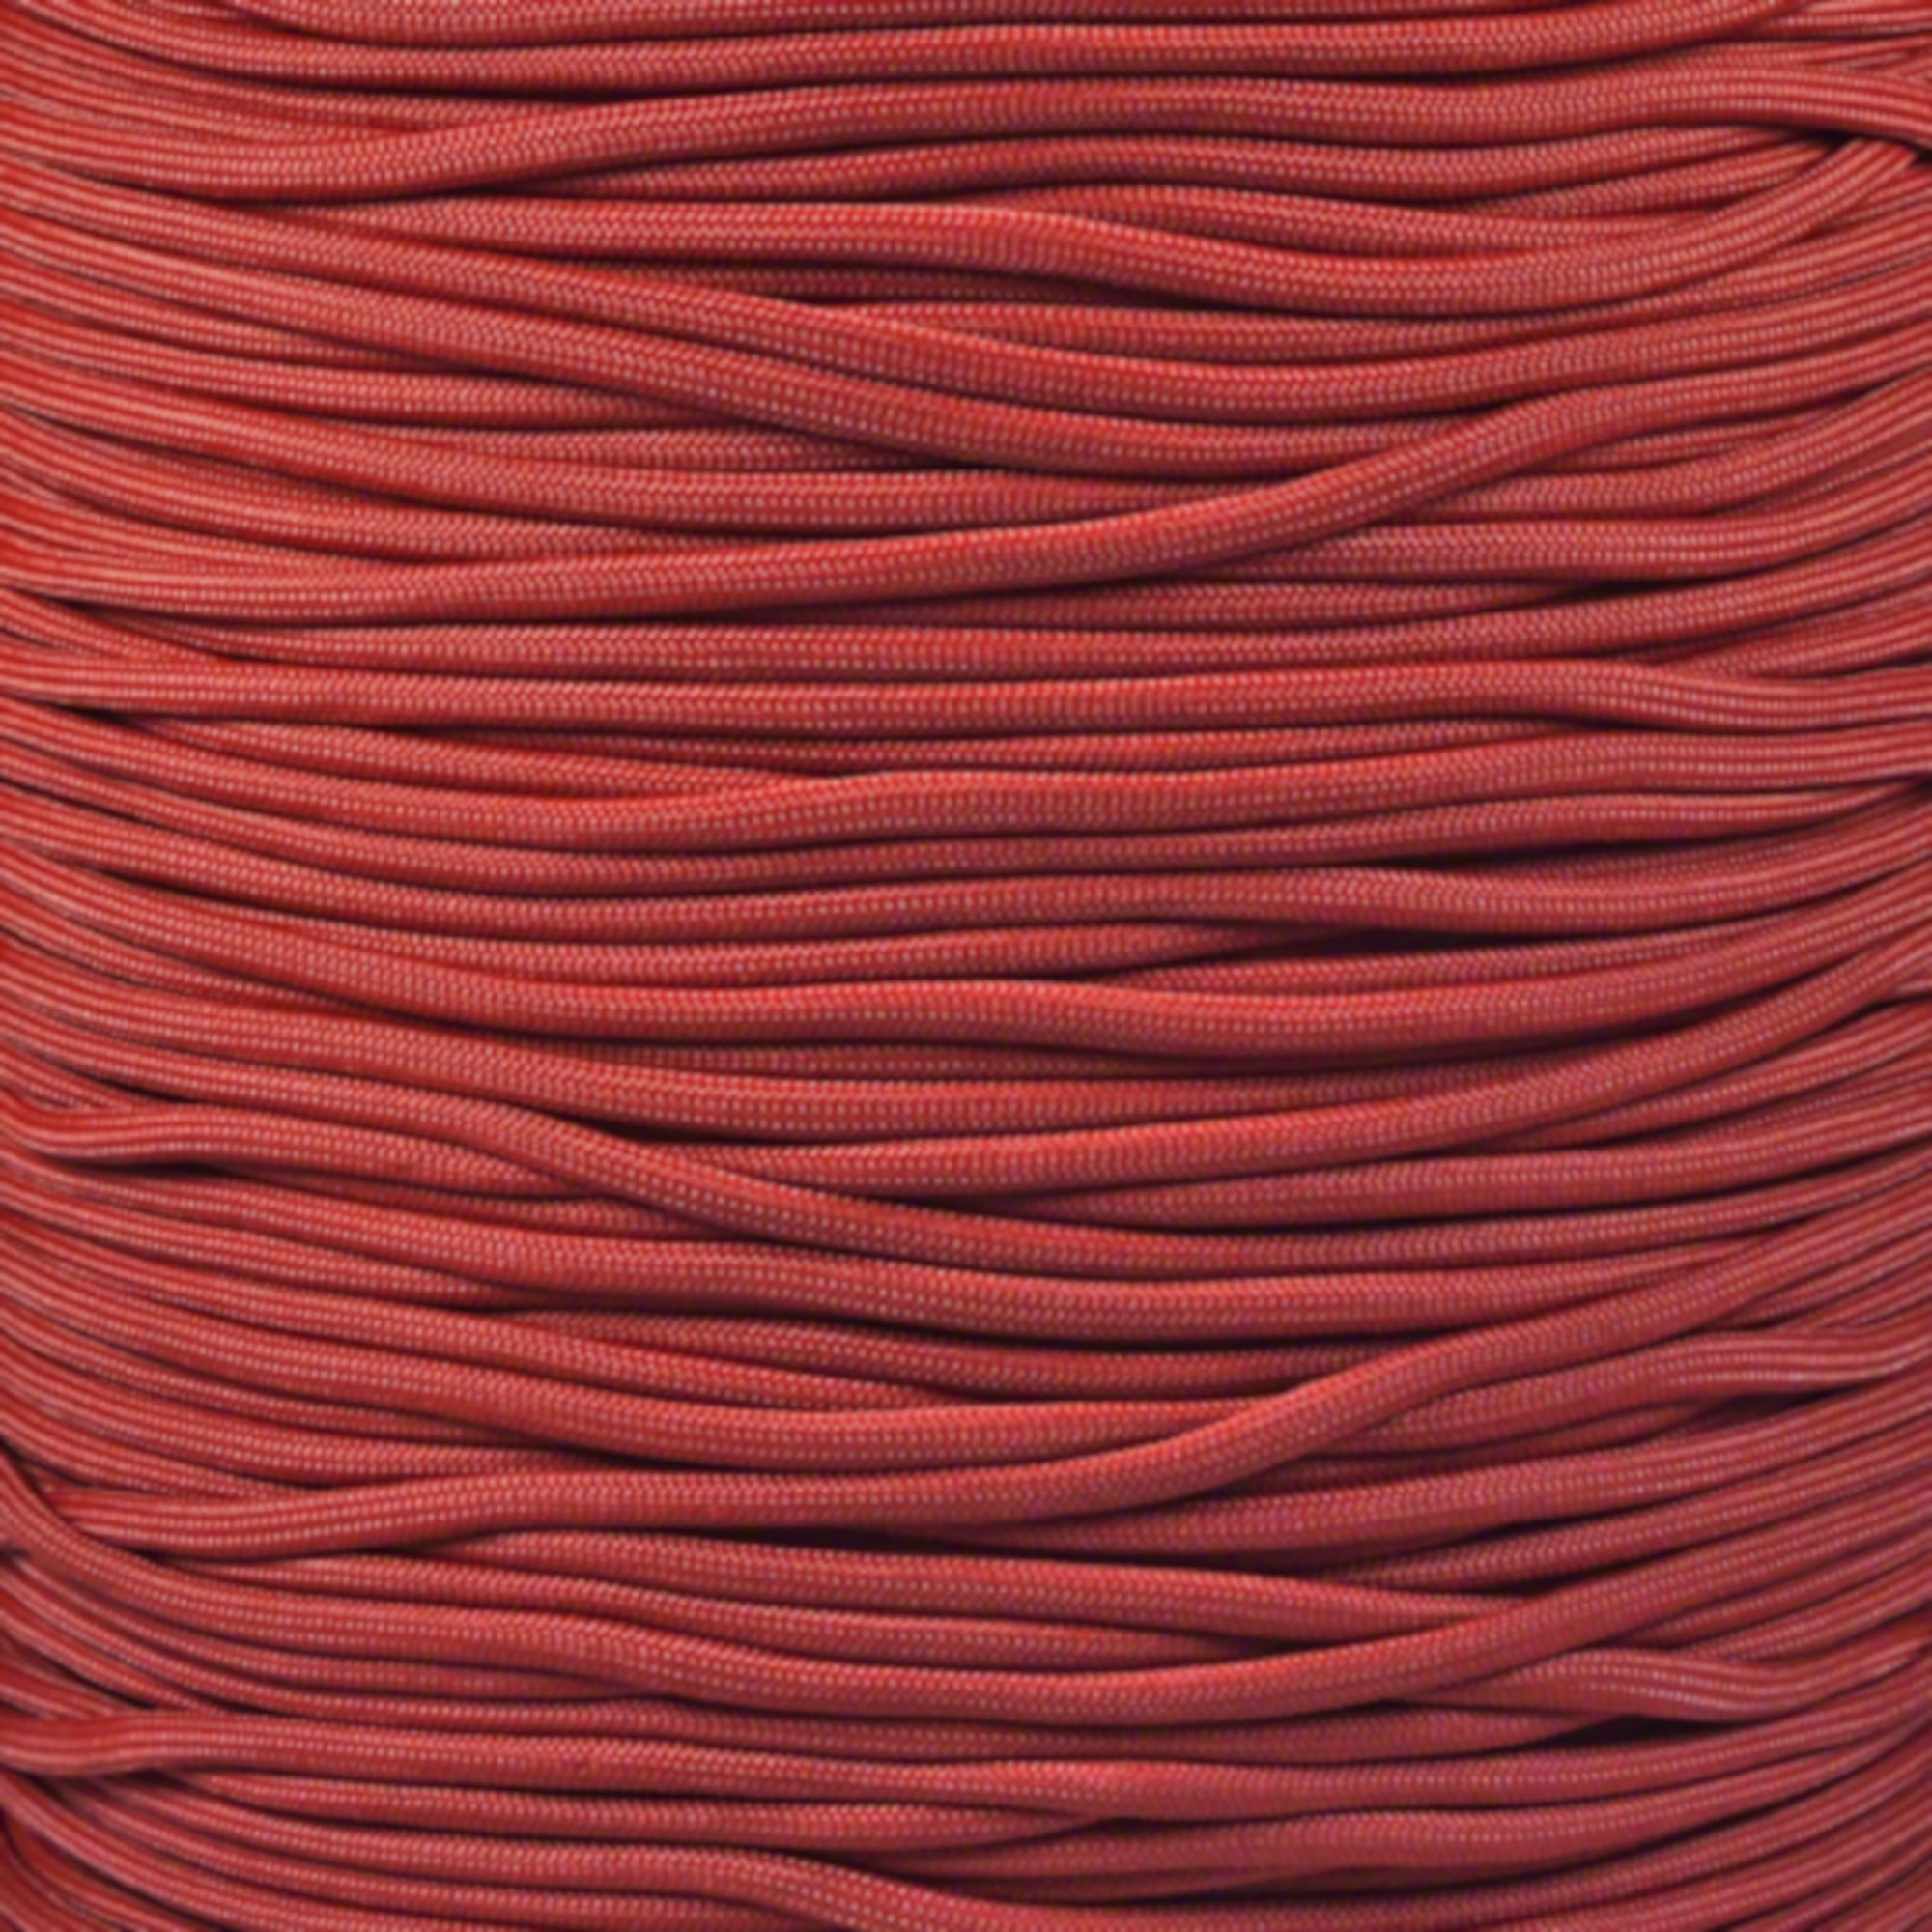 PARACORD PLANET 10 20 25 50 100 Foot Hanks and 250 1000 Foot Spools of Parachute 550 Cord Type III 7 Strand Paracord 